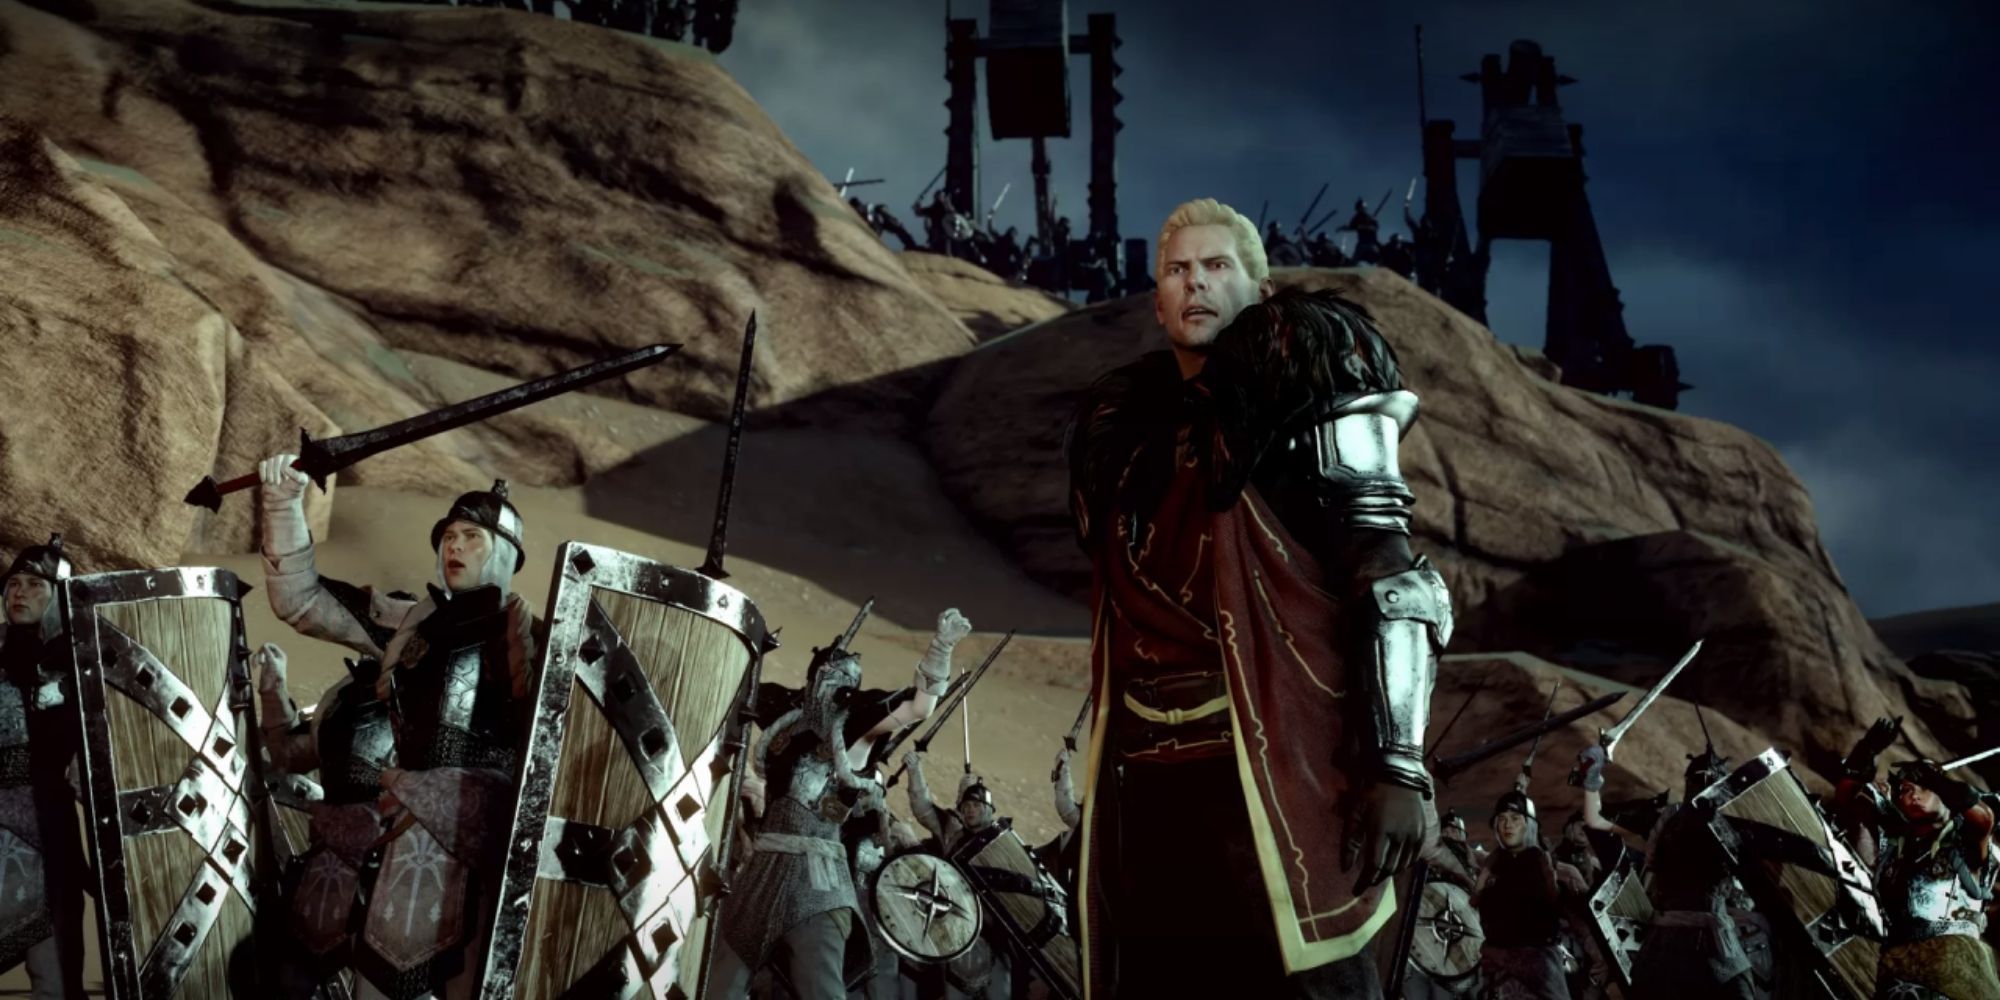 Dragon Age Inquisition - Cullen at Adamant Fortress in Orlais